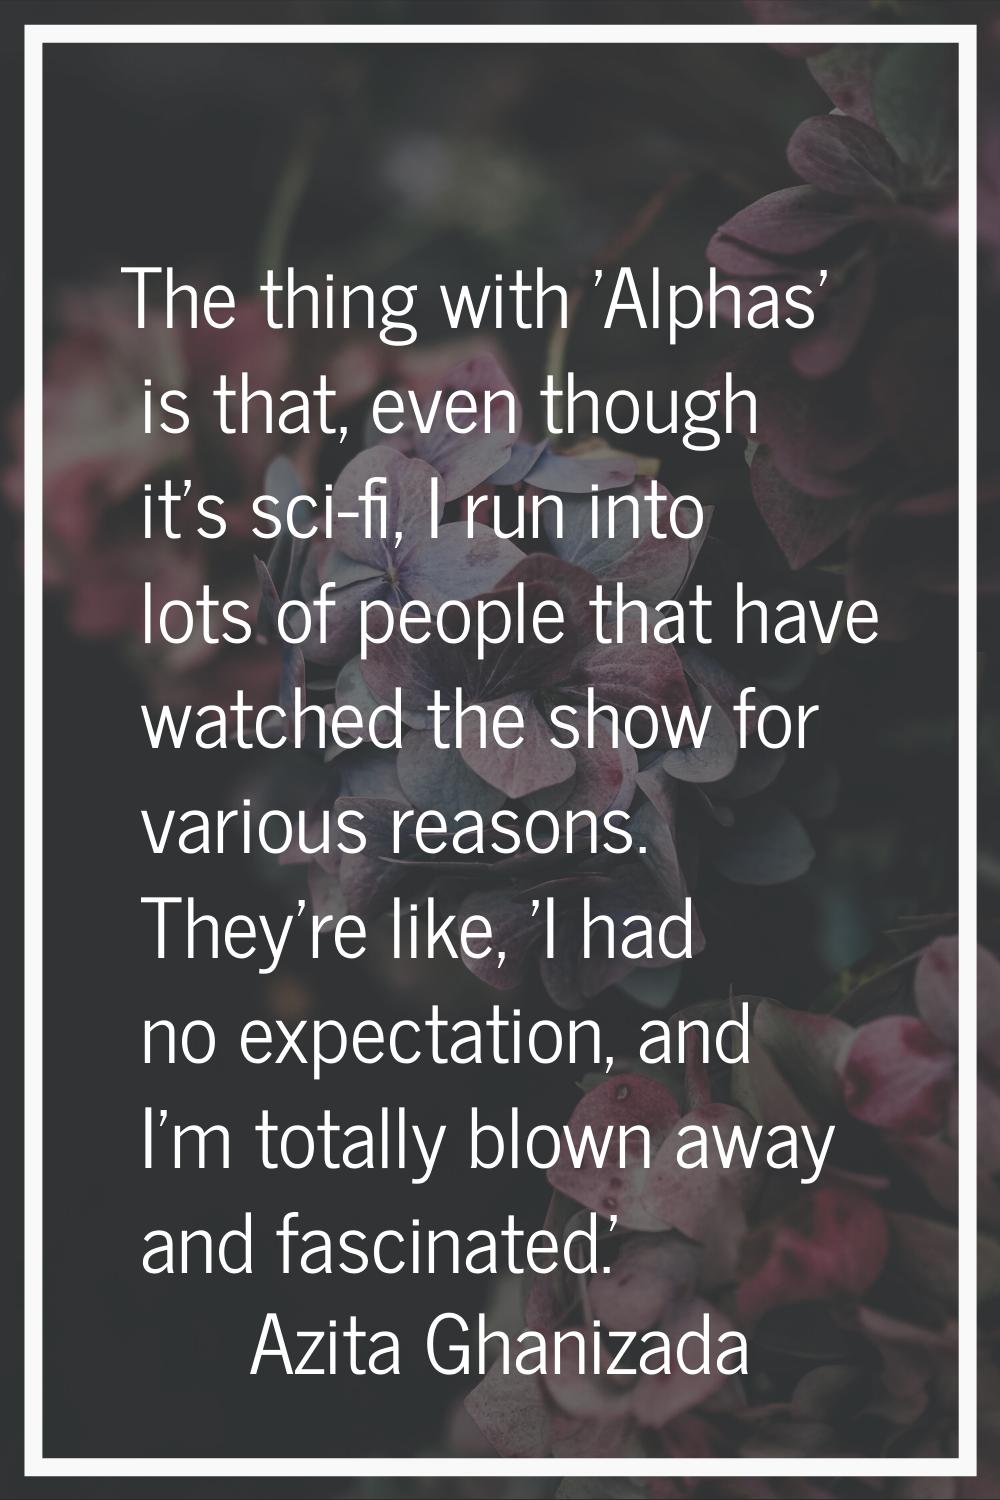 The thing with 'Alphas' is that, even though it's sci-fi, I run into lots of people that have watch